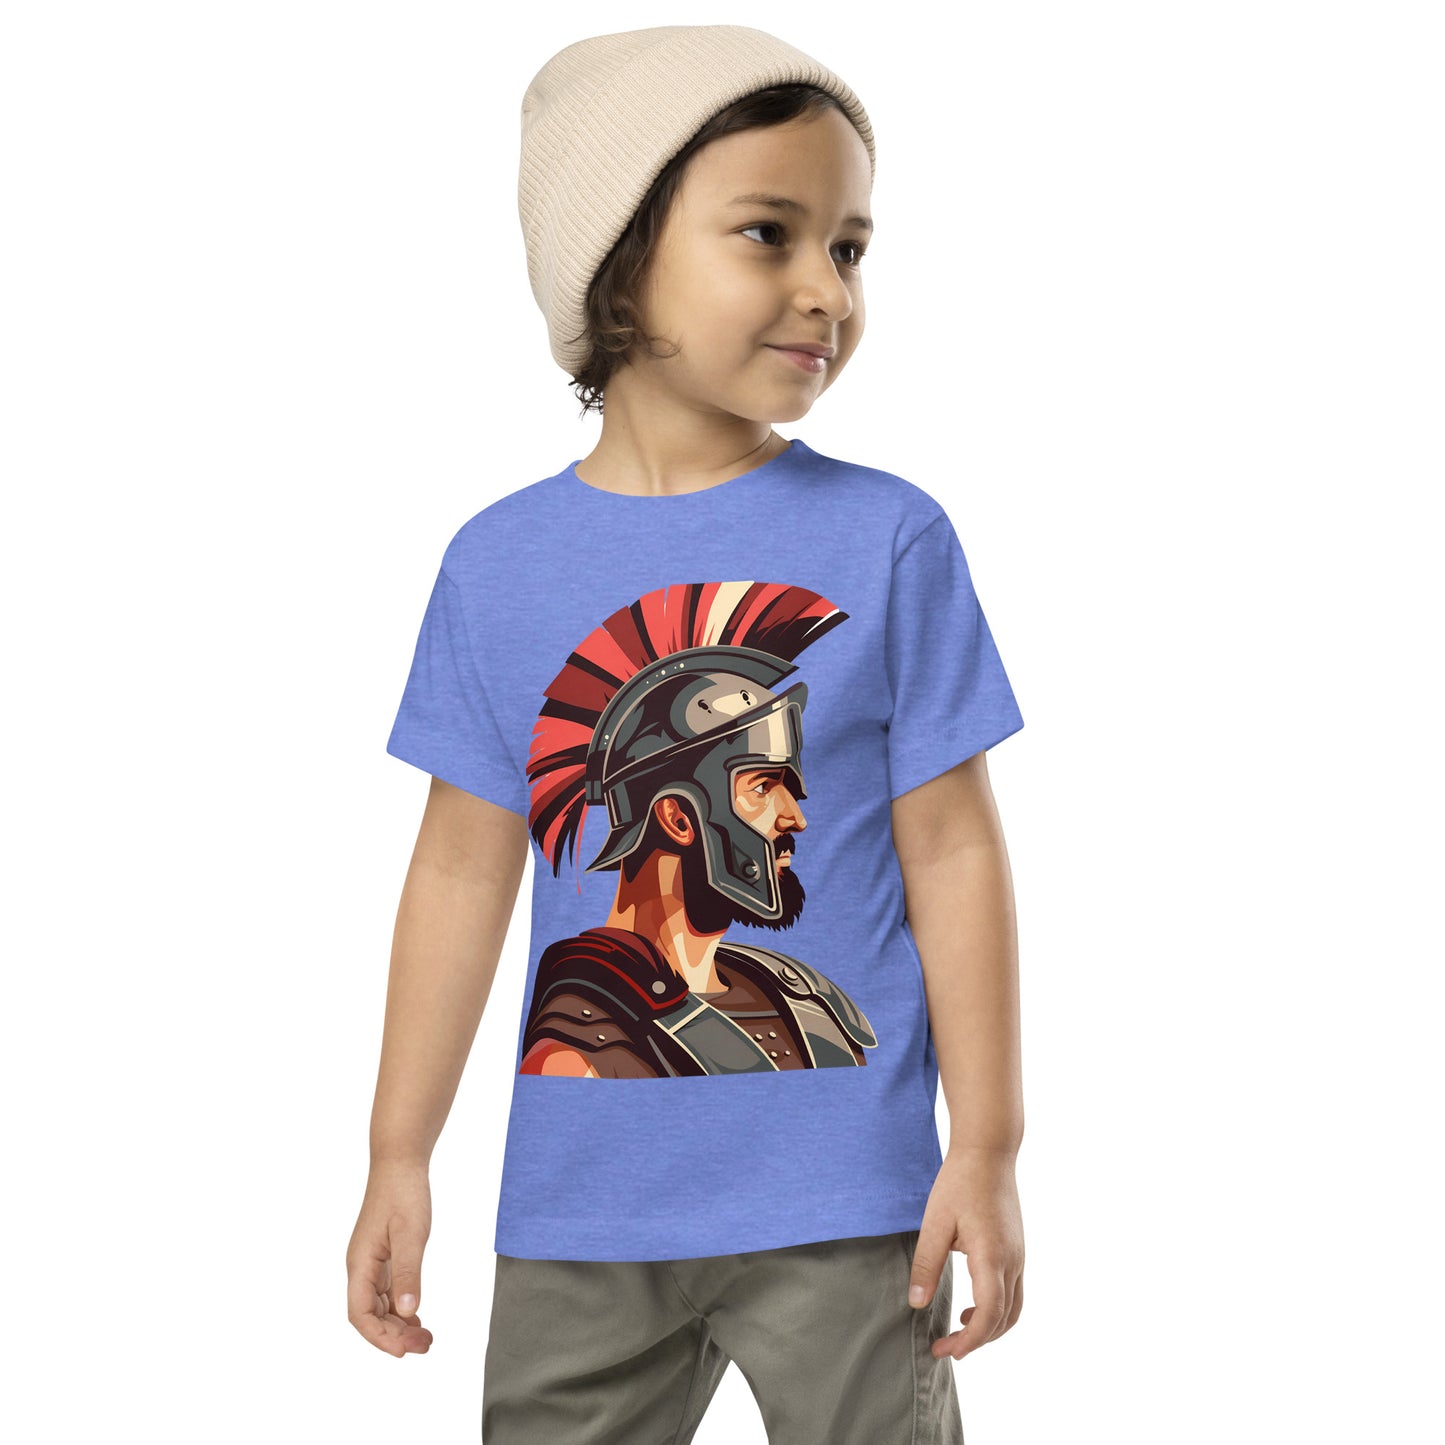 Toddler with a columbia blue T-shirt with a print of a warrior